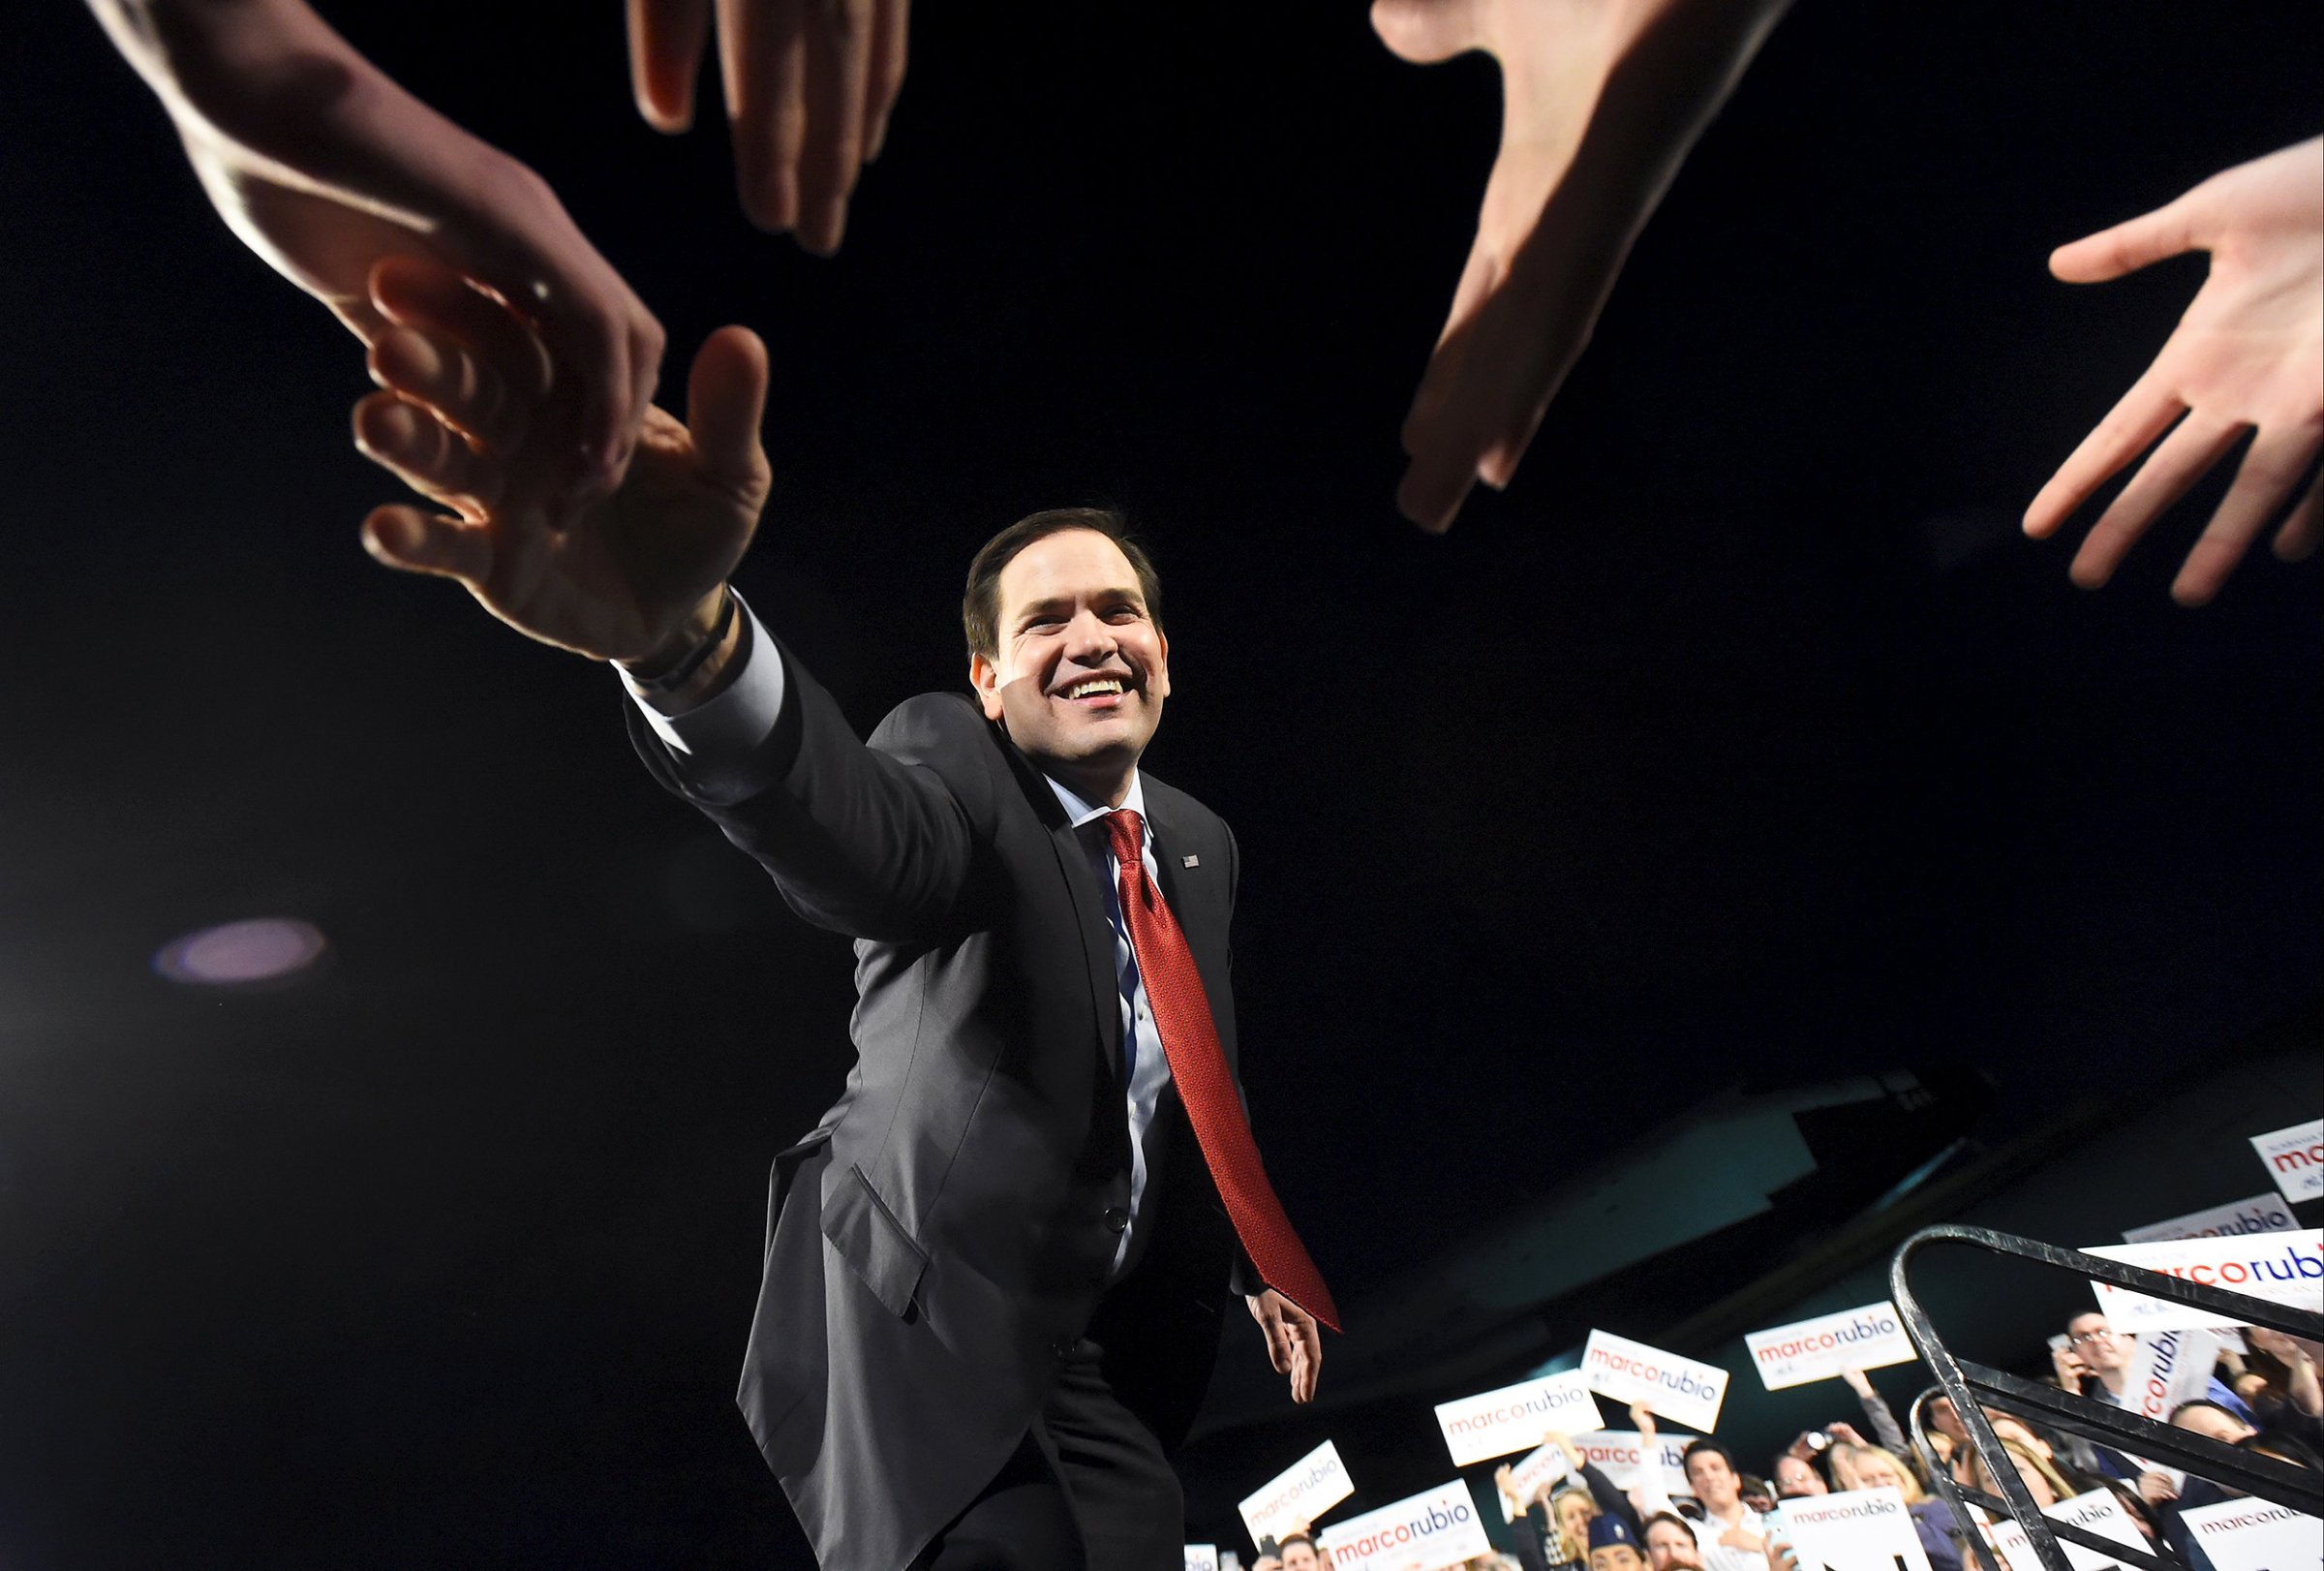 Marco Rubio greets supporters during a campaign stop at the U.S. Space and Rocket Center in Huntsville, Alabama on Feb. 27, 2016.